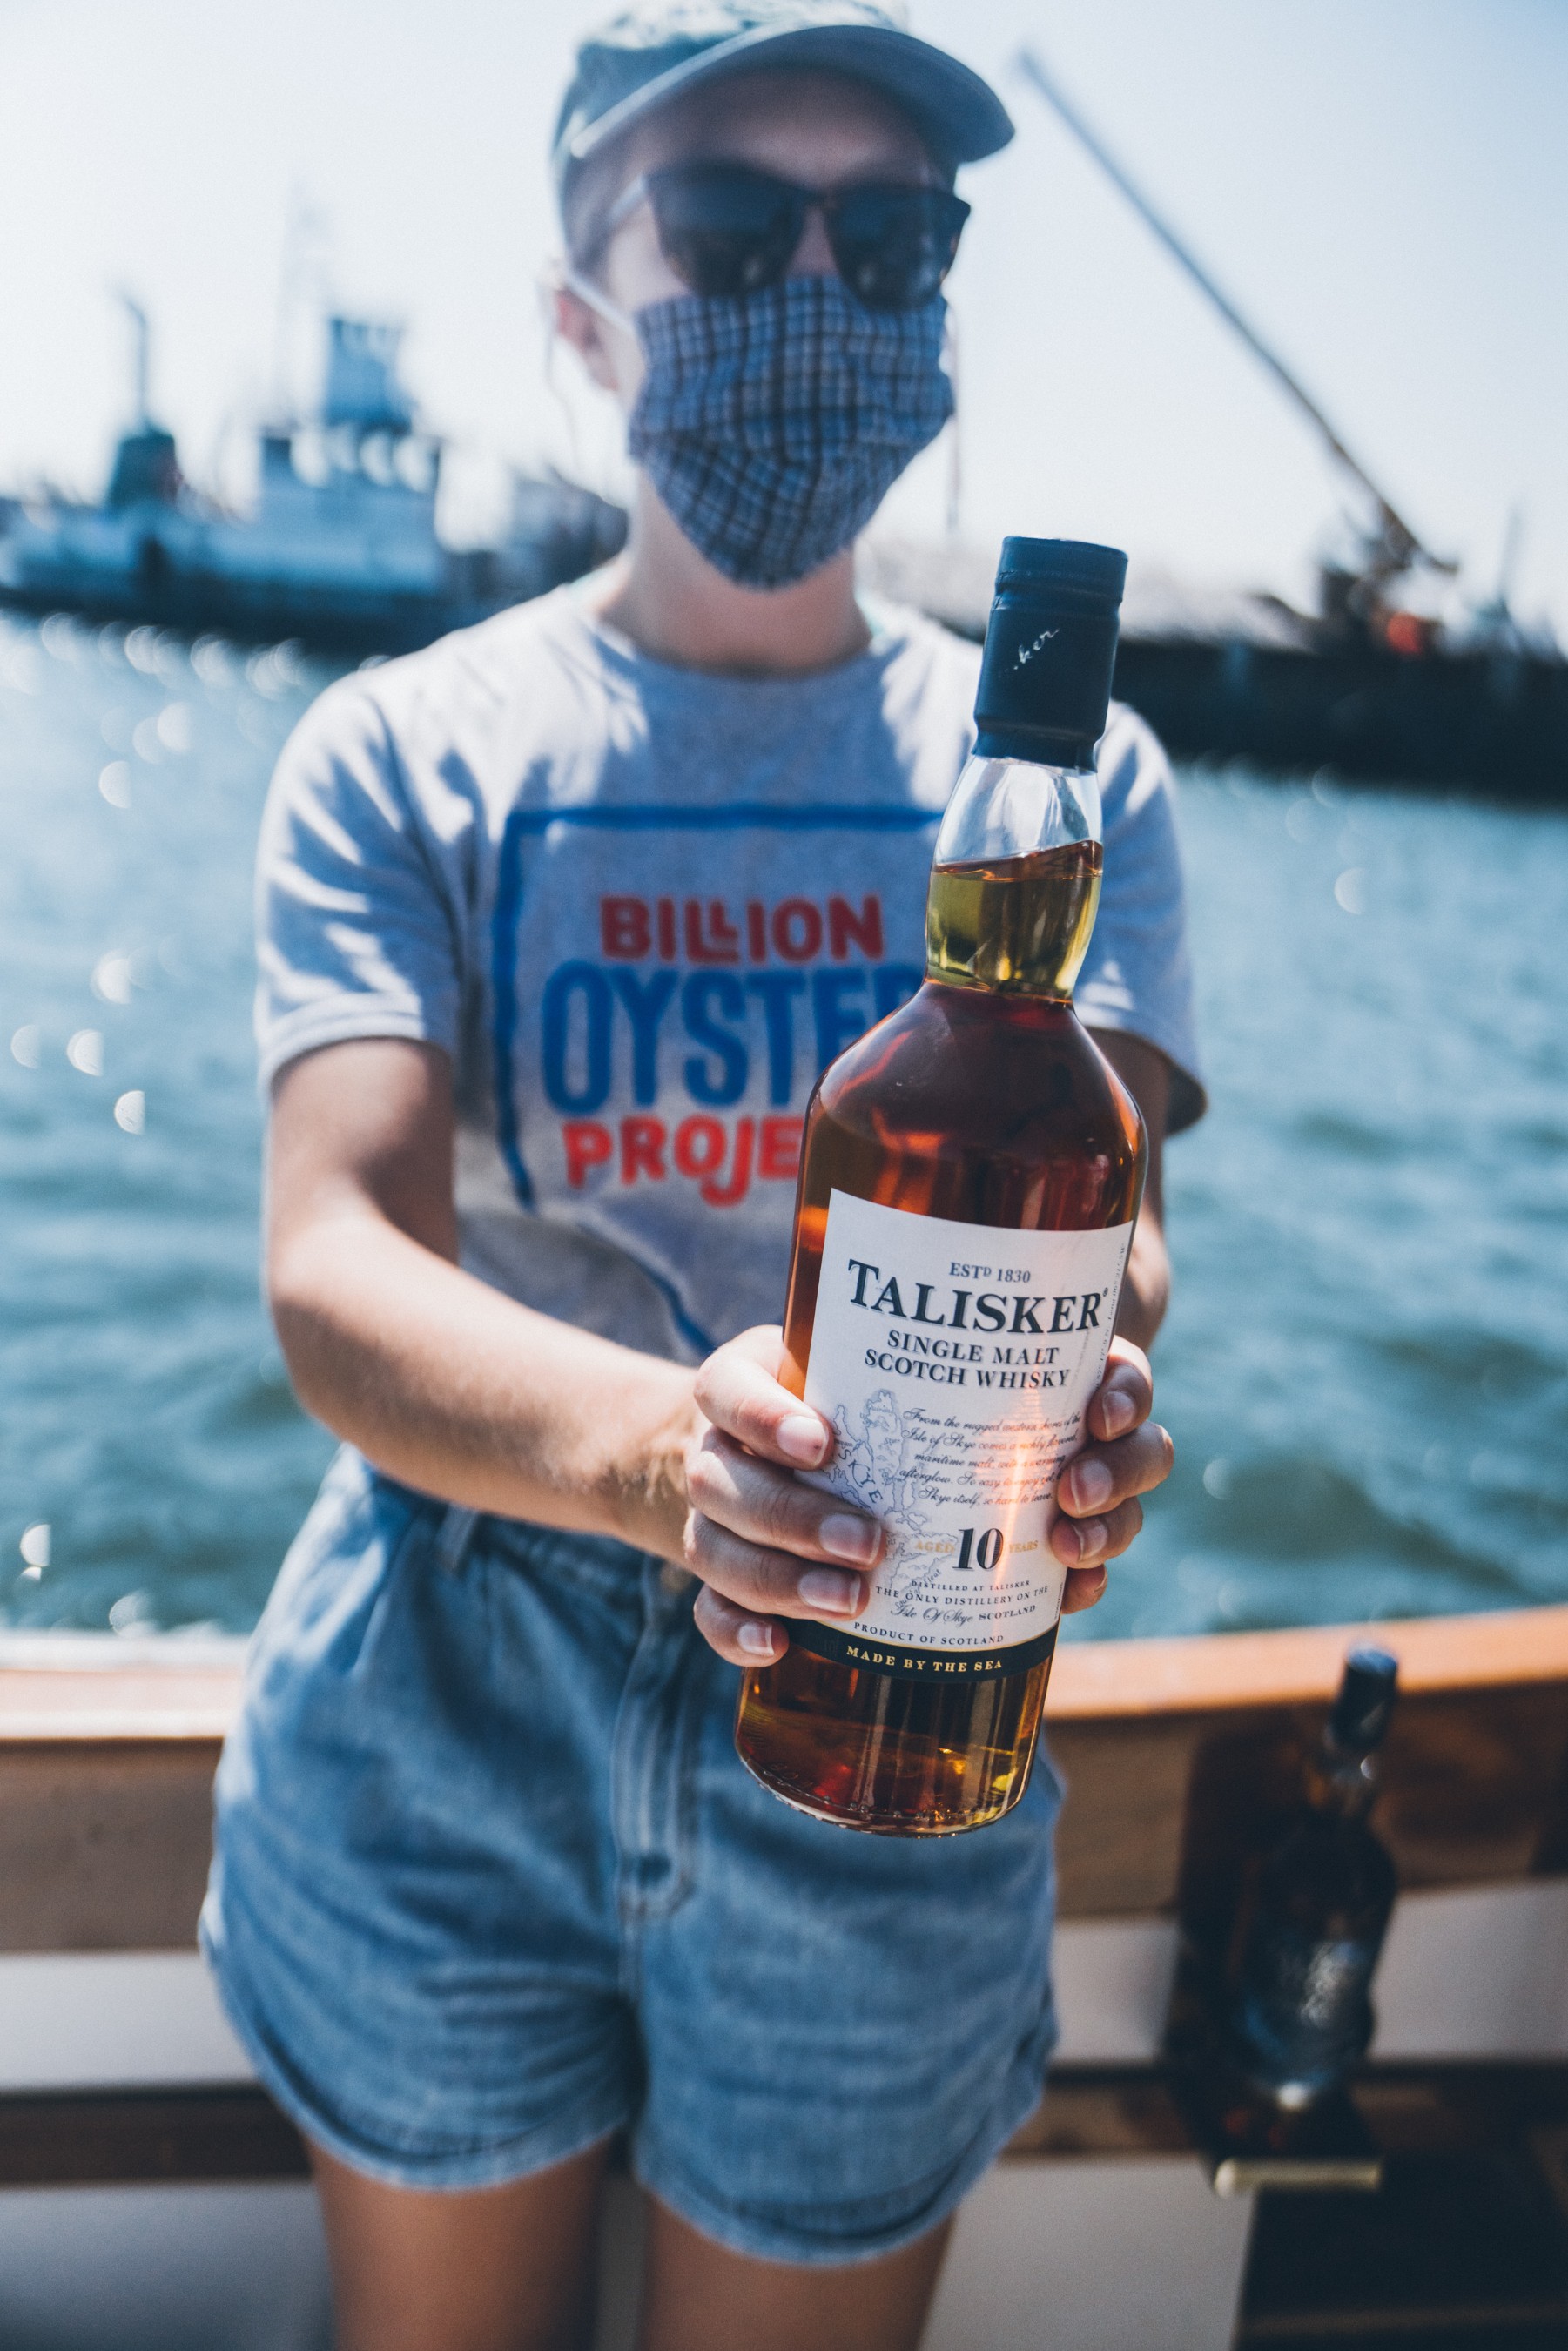 Talisker’s sponsorship of the Shell Collection program will allow the recycling process of this necessary resource to resume. Together, Talisker and Billion Oyster Project will continue to make an impact on New York City’s oyster restoration efforts. #ShuckFromHome. Photo Credit: Jose Silva.